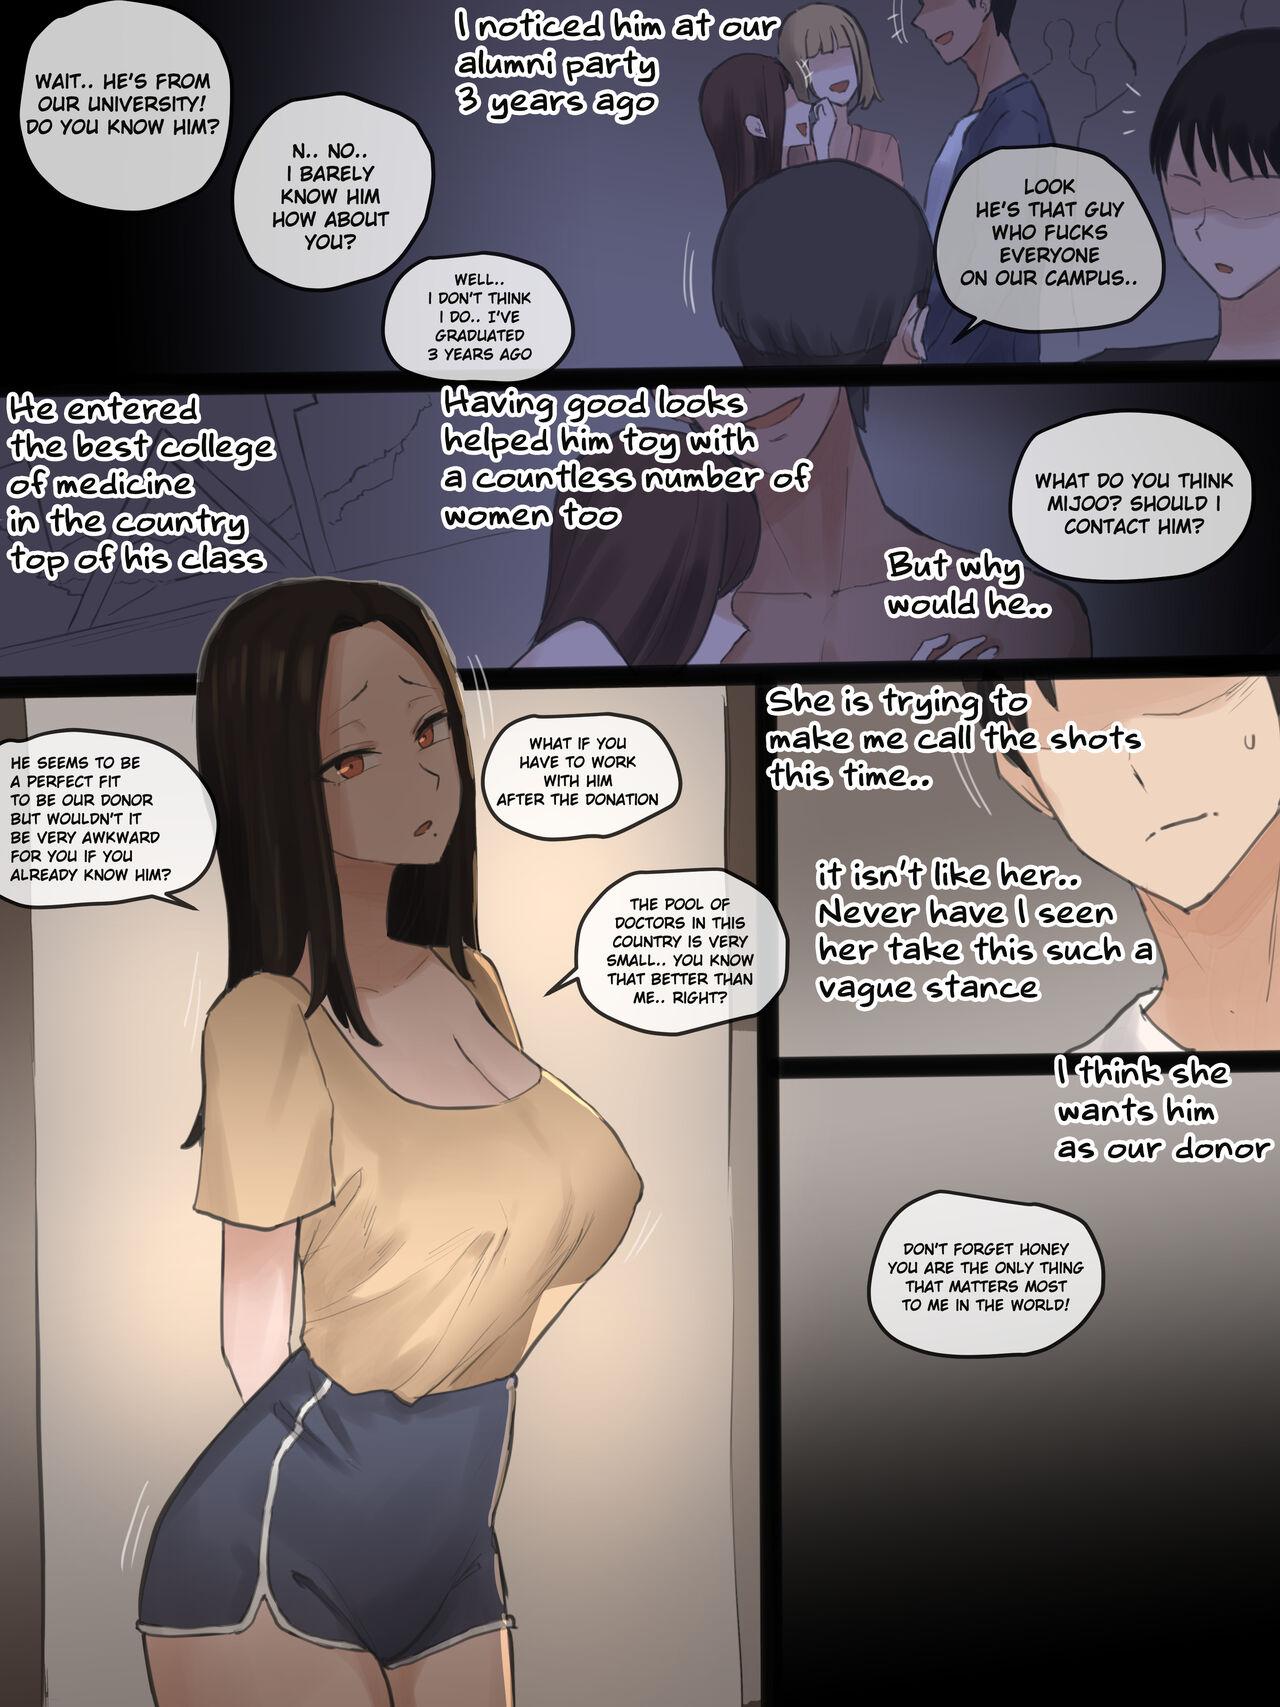 Long Hair DOUBT - Original Officesex - Page 7